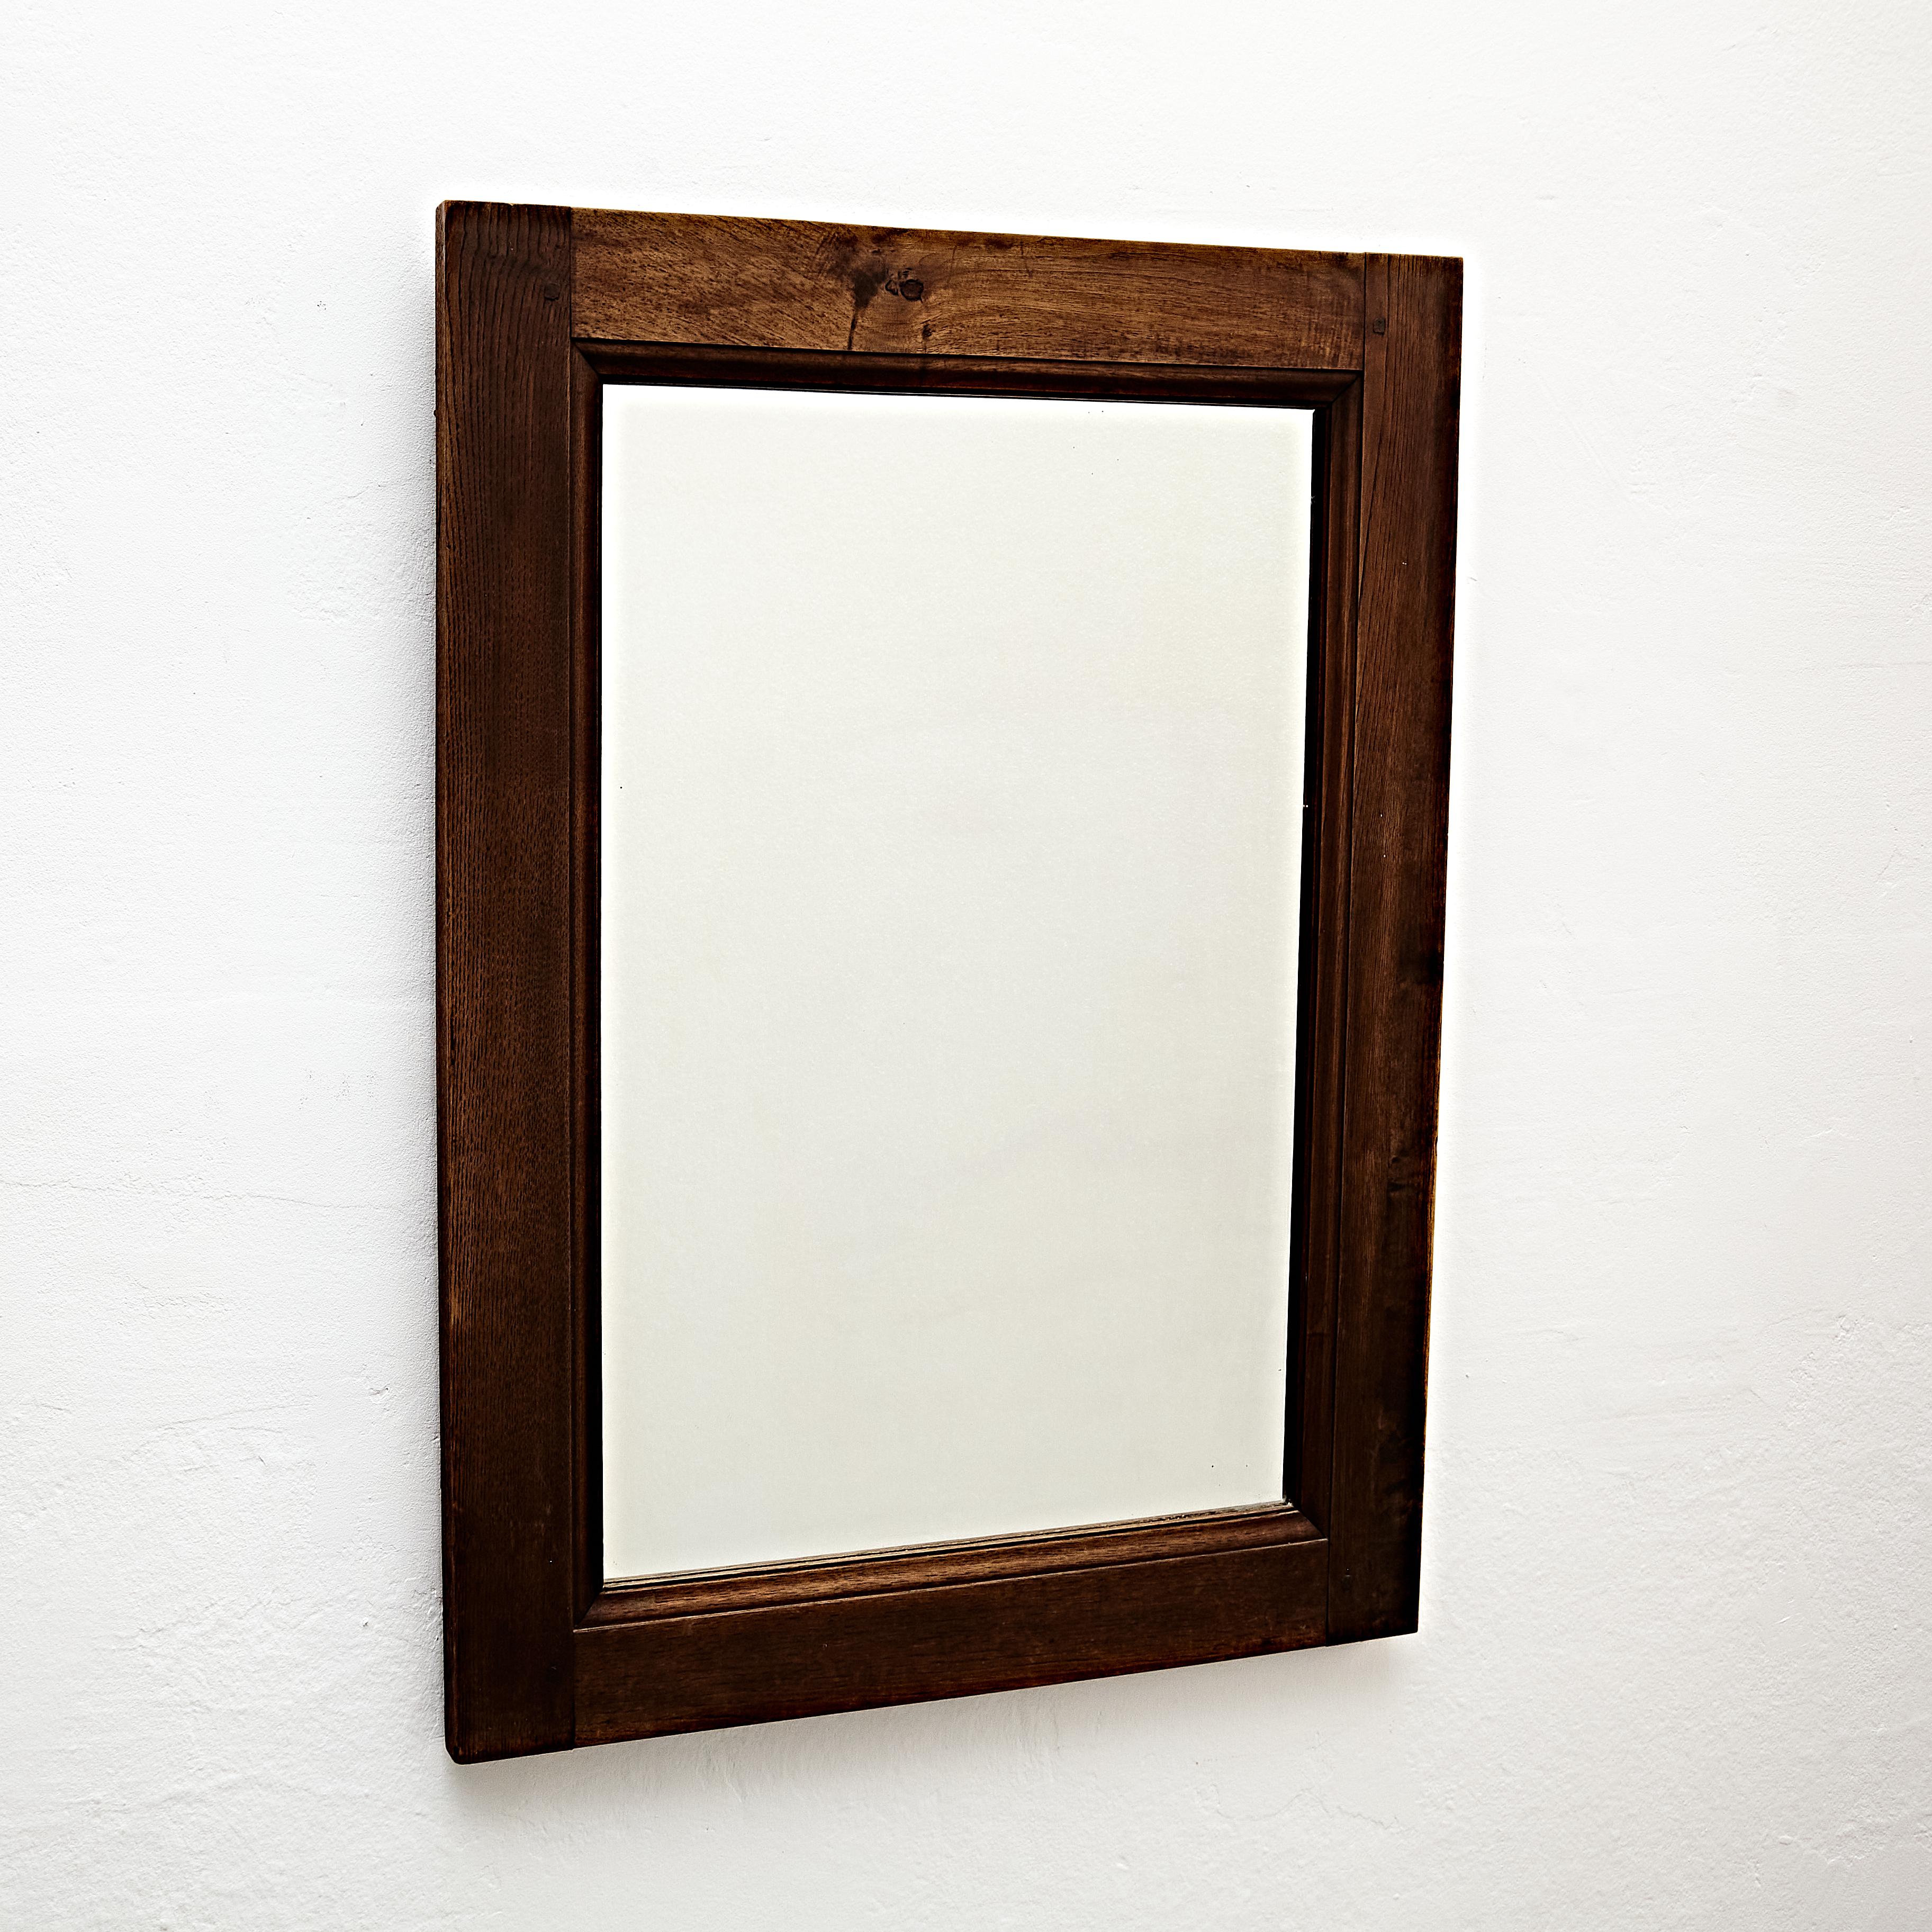 Mid-Century Modern rustic wood mirror.

Manufactured in France, circa 1960.

In original condition with minor wear consistent of age and use, preserving a beautiful patina.

Materials: 
Wood 

Dimensions: 
D 2.7 cm x W 62 cm x H 84.5